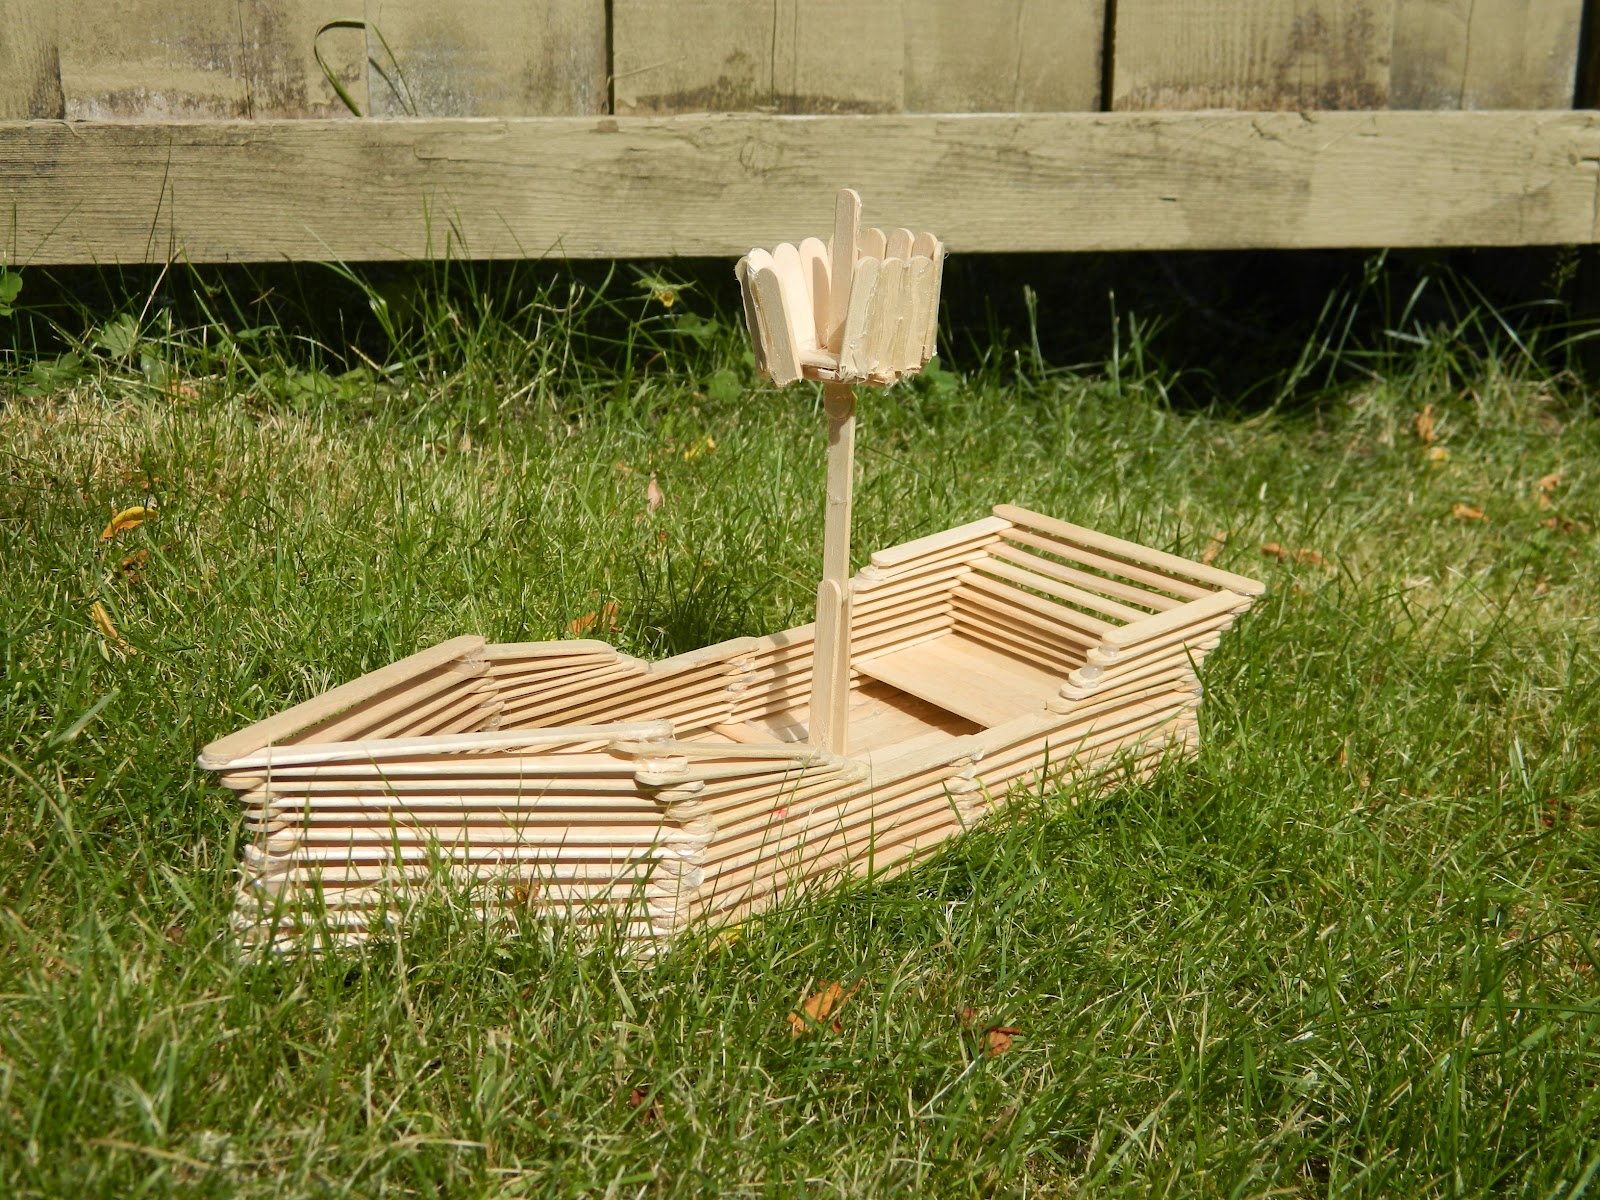 One Of A Kind Artz: The Popsicle Stick Boat